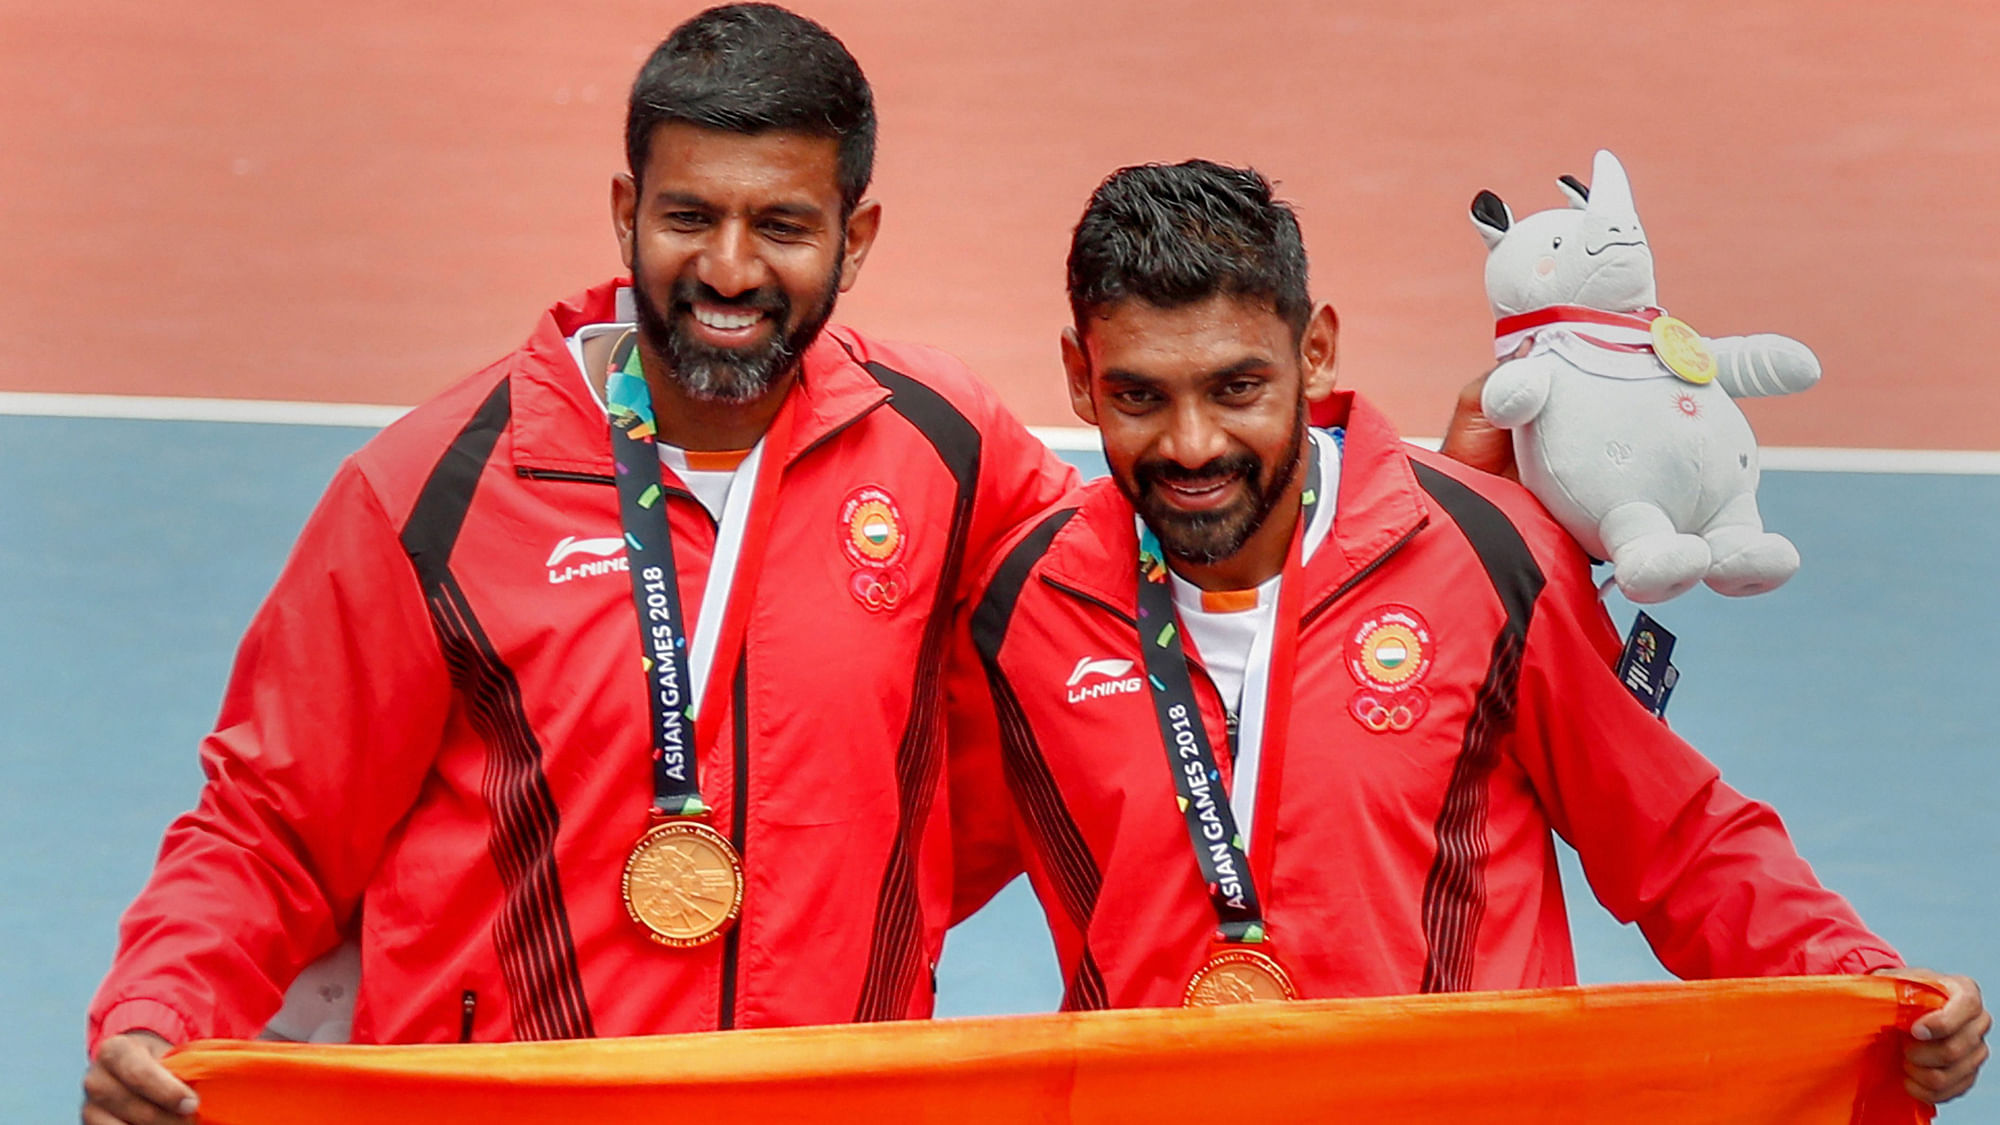 Palembang: Gold medalists Rohan Bopanna and Divij Sharan poses with the tricolour after the presentation ceremony for Men’s Double event at 18th Asian Games Jakarta Palembang 2018.